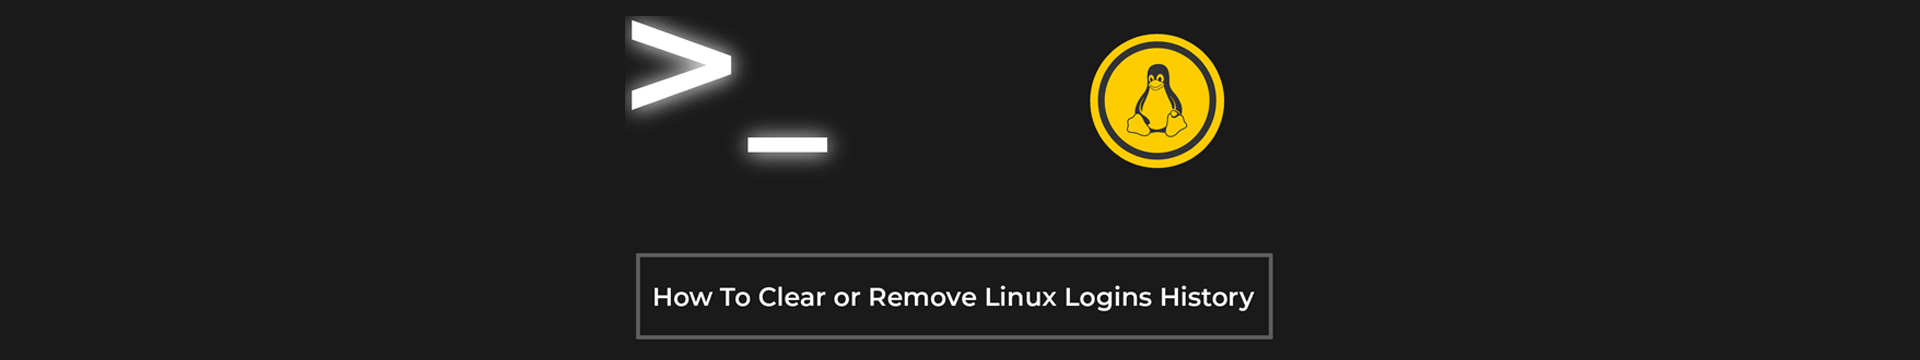 How To Clear or Remove Last Logins History in Linux